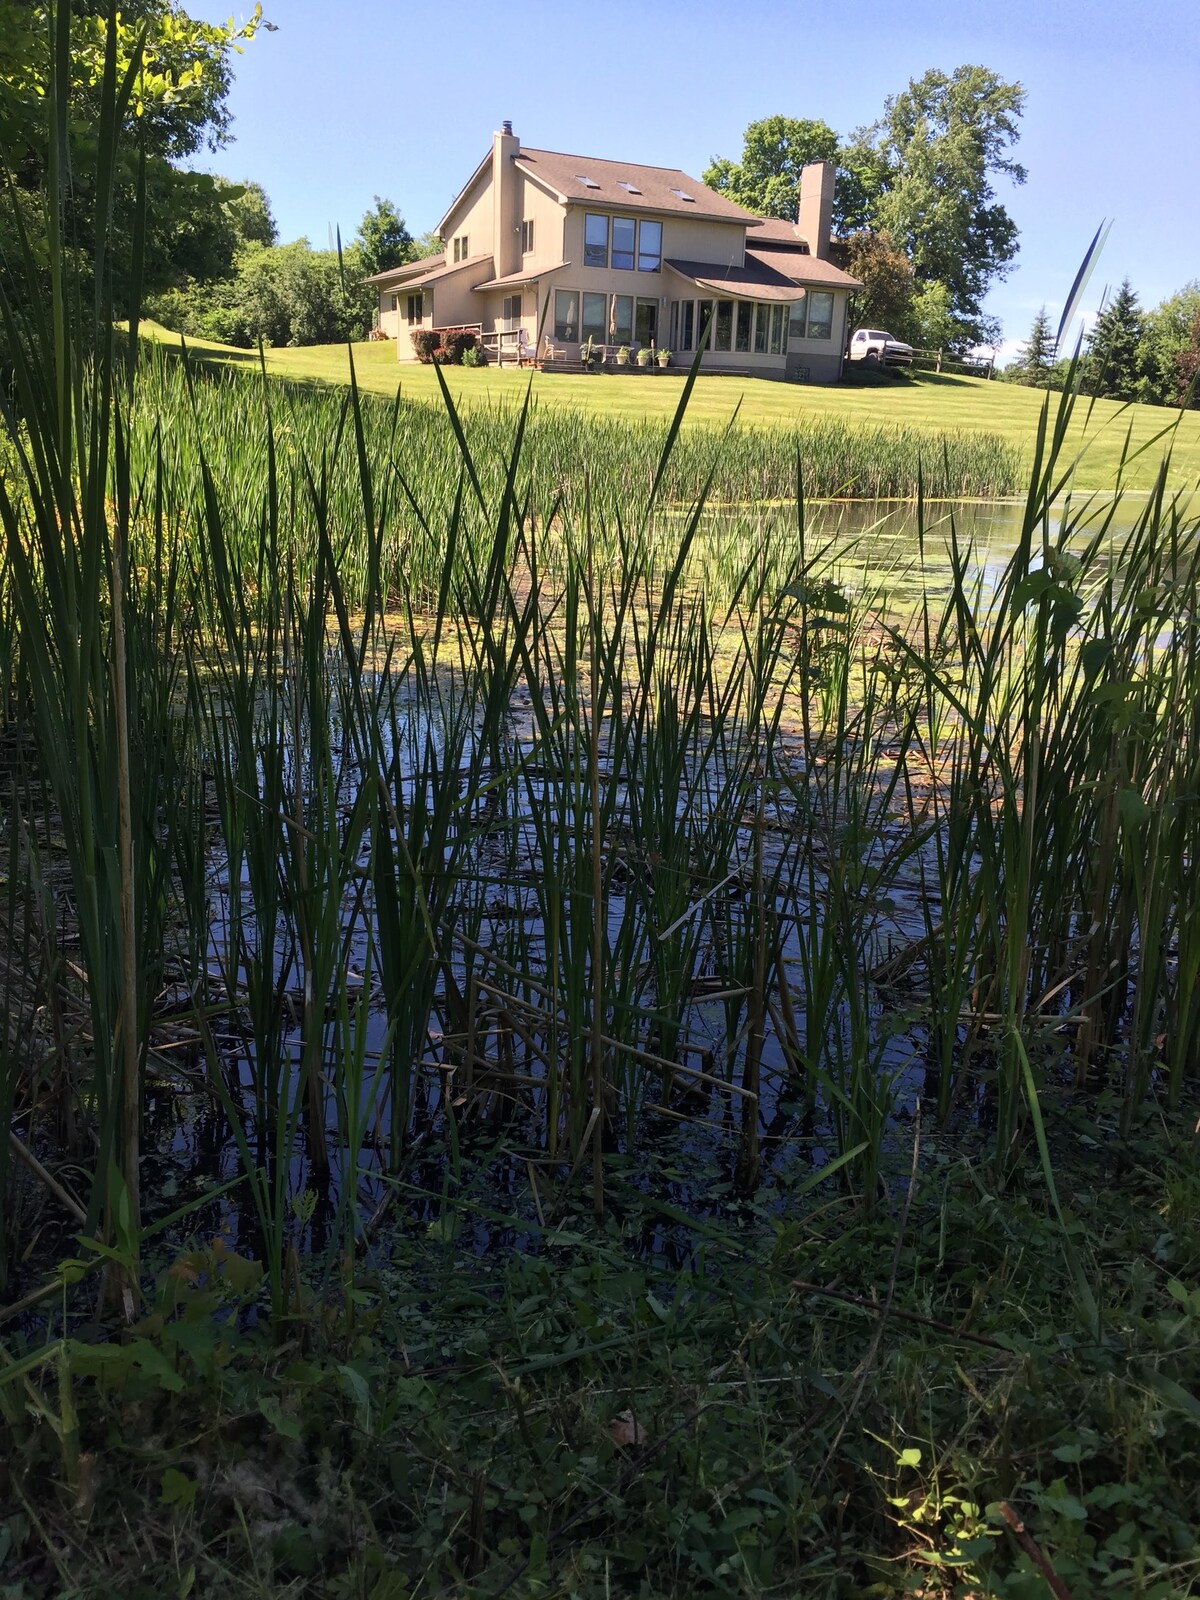 Gorgeous Rural Escape on 14 acres with pond